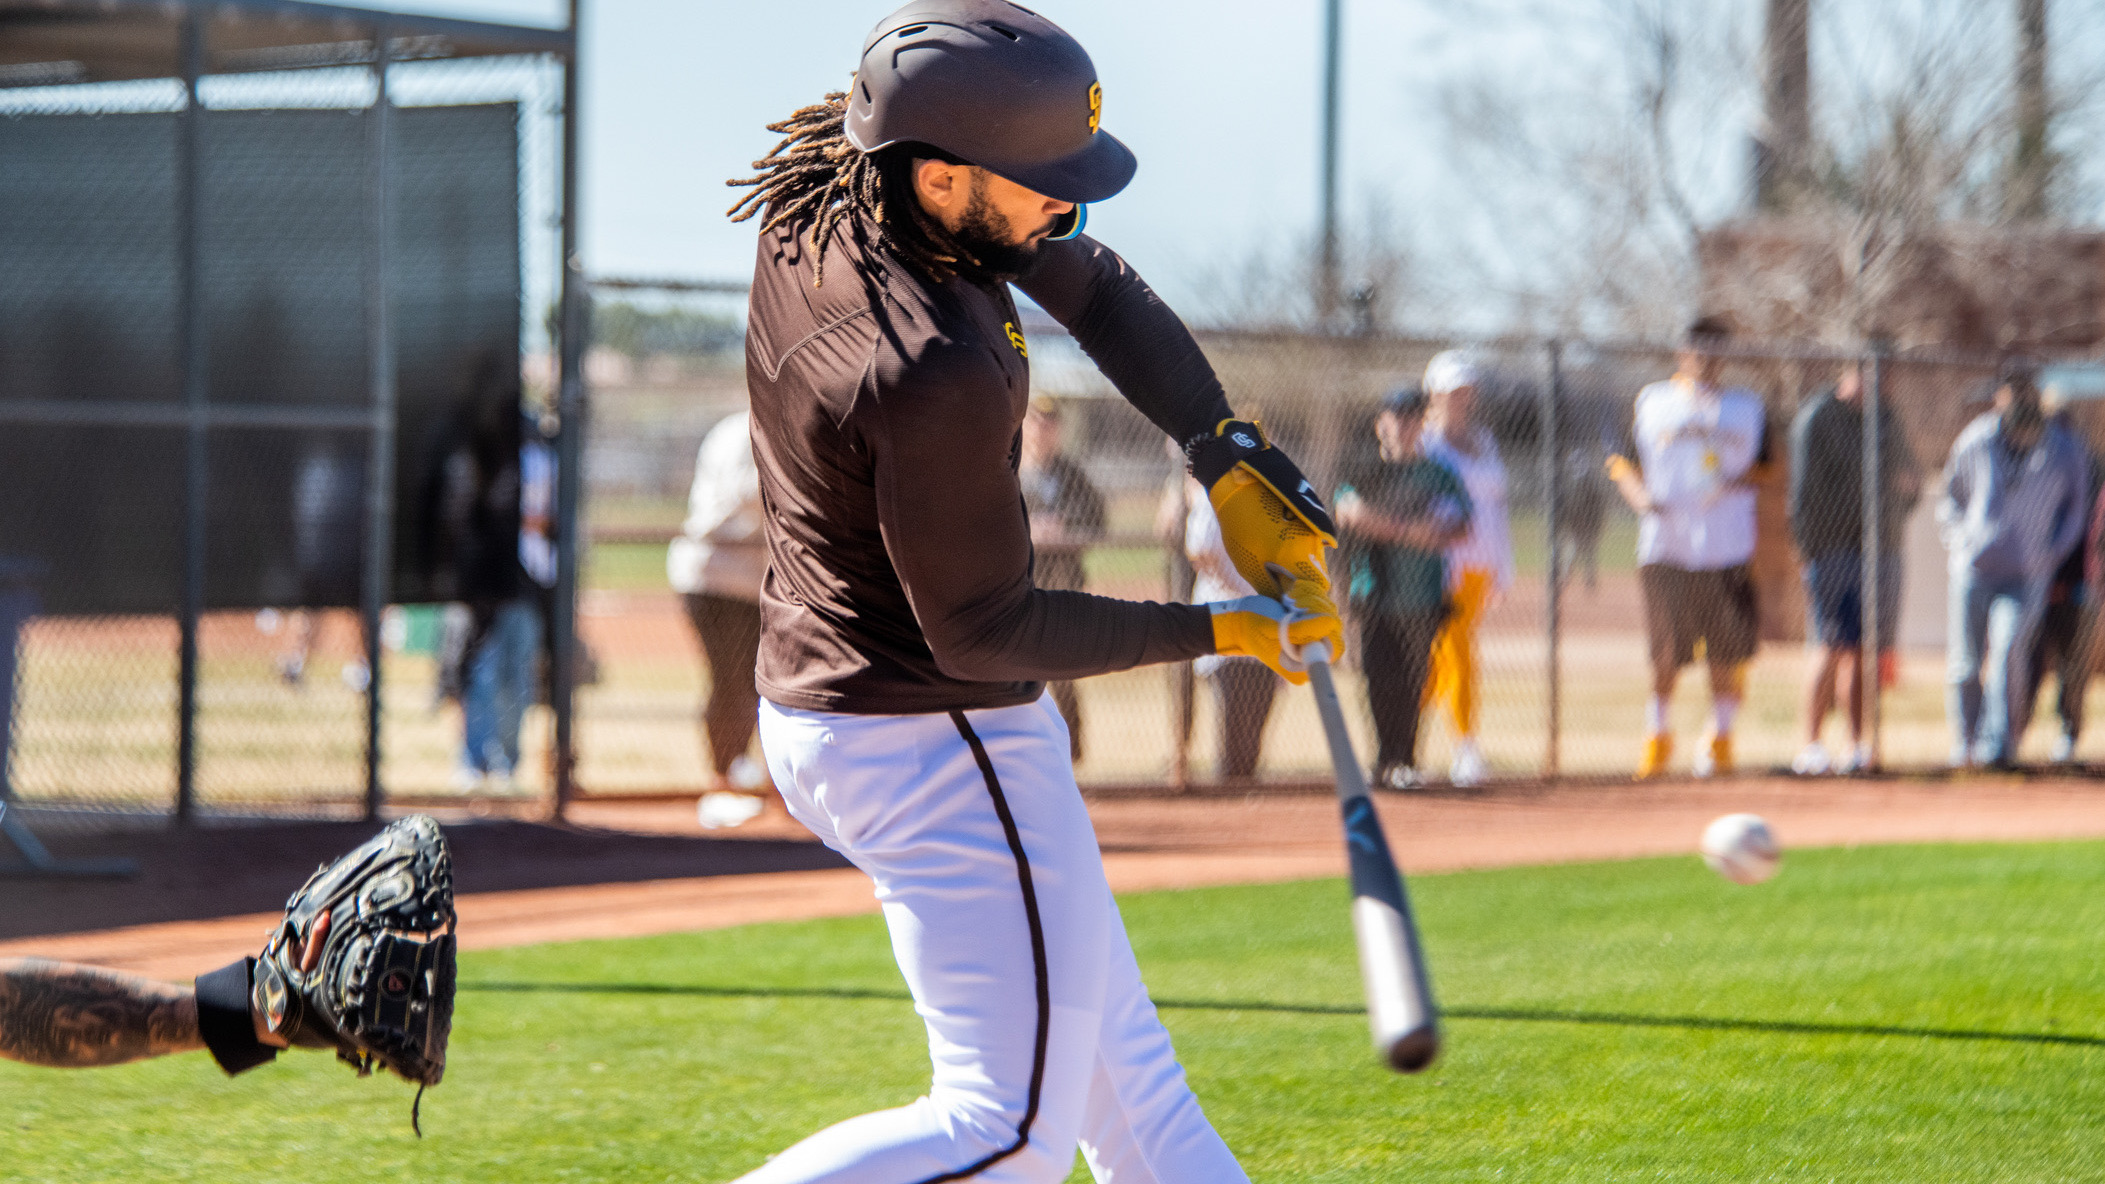 Fernando Tatis Jr. takes a swing at the Peoria Sports Complex in Peoria, Ariz. in March, 2023.